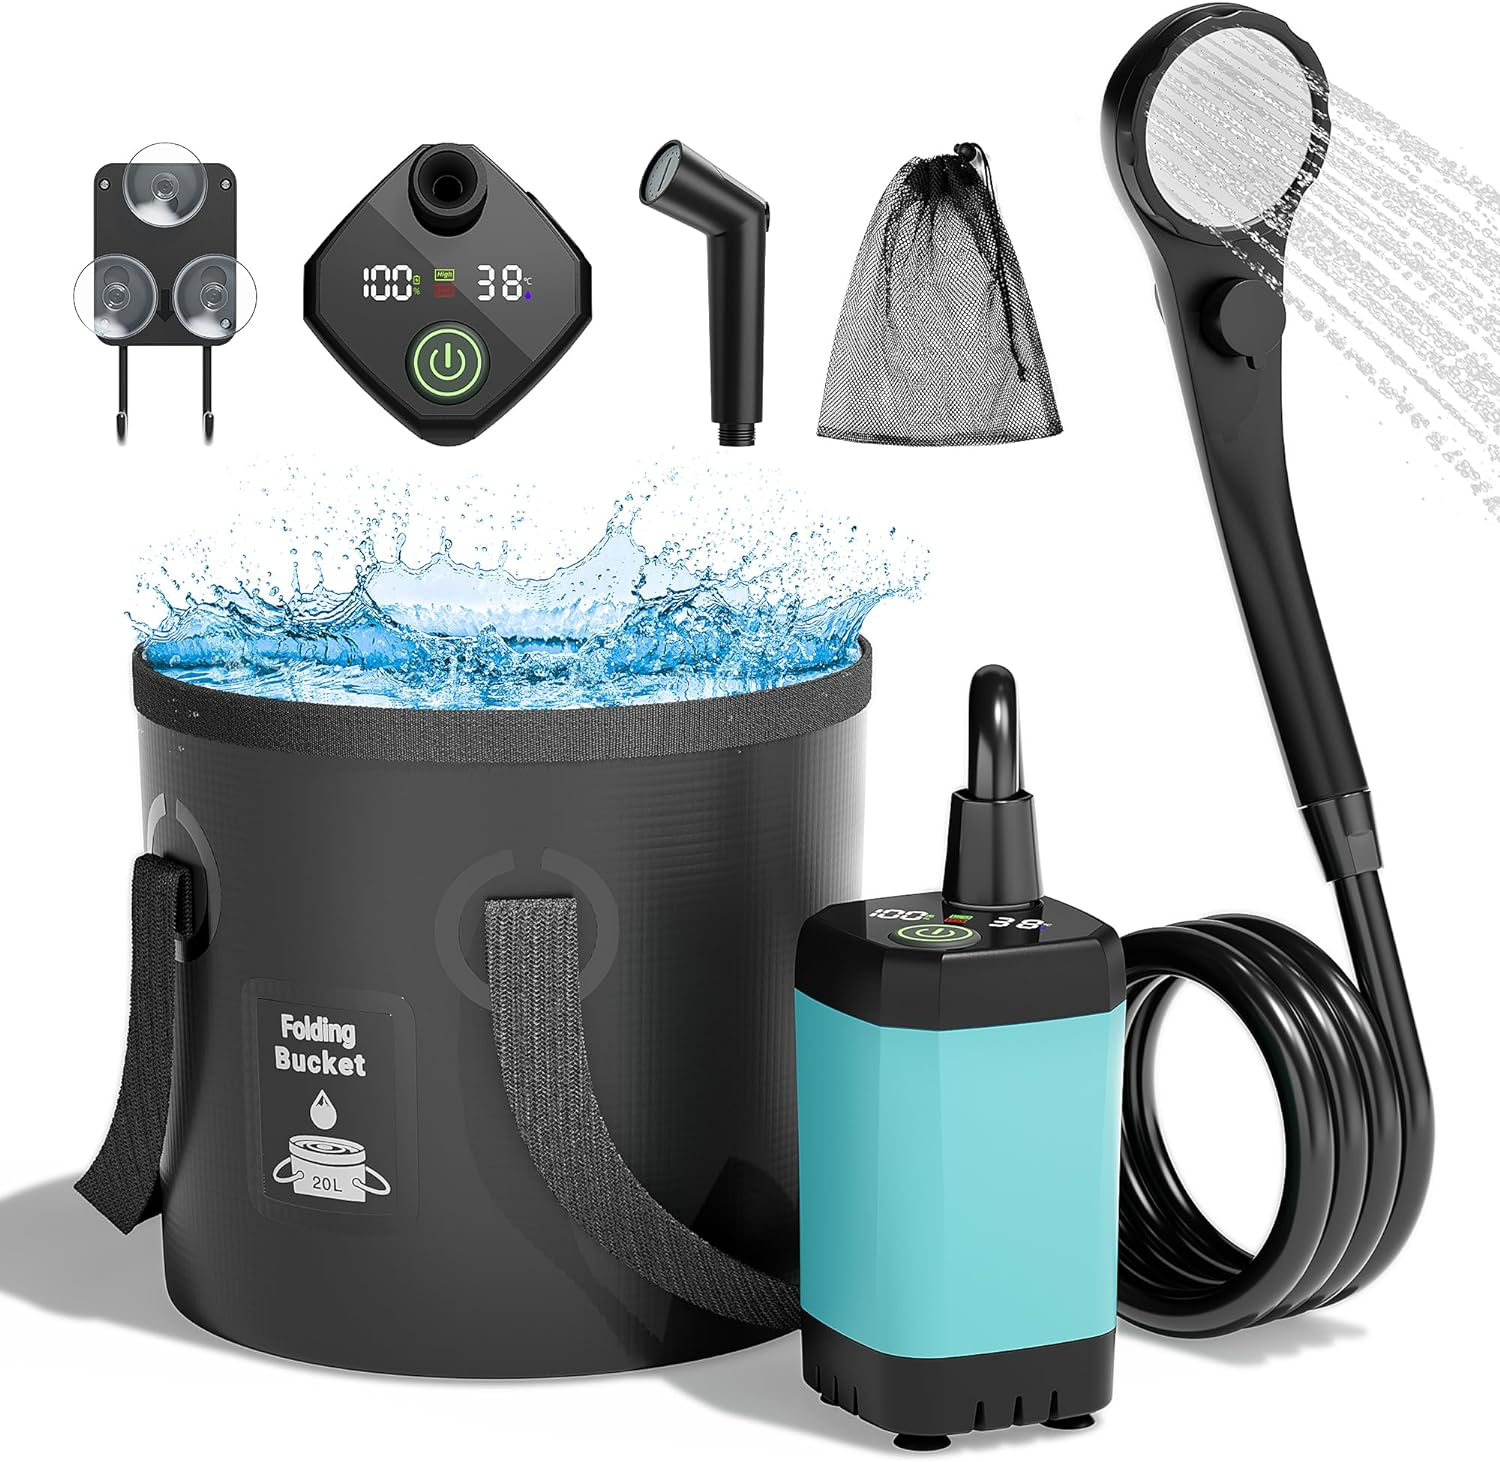 Portable Camping Shower, 6000mAh Rechargeable Shower Pump, Filtered Shower Head & 5 Gallons Foldable Bucket, Outdoor Shower for Hiking Beach, Travel, Pet Bath, Car Washing, Surf & Boat Cleaning